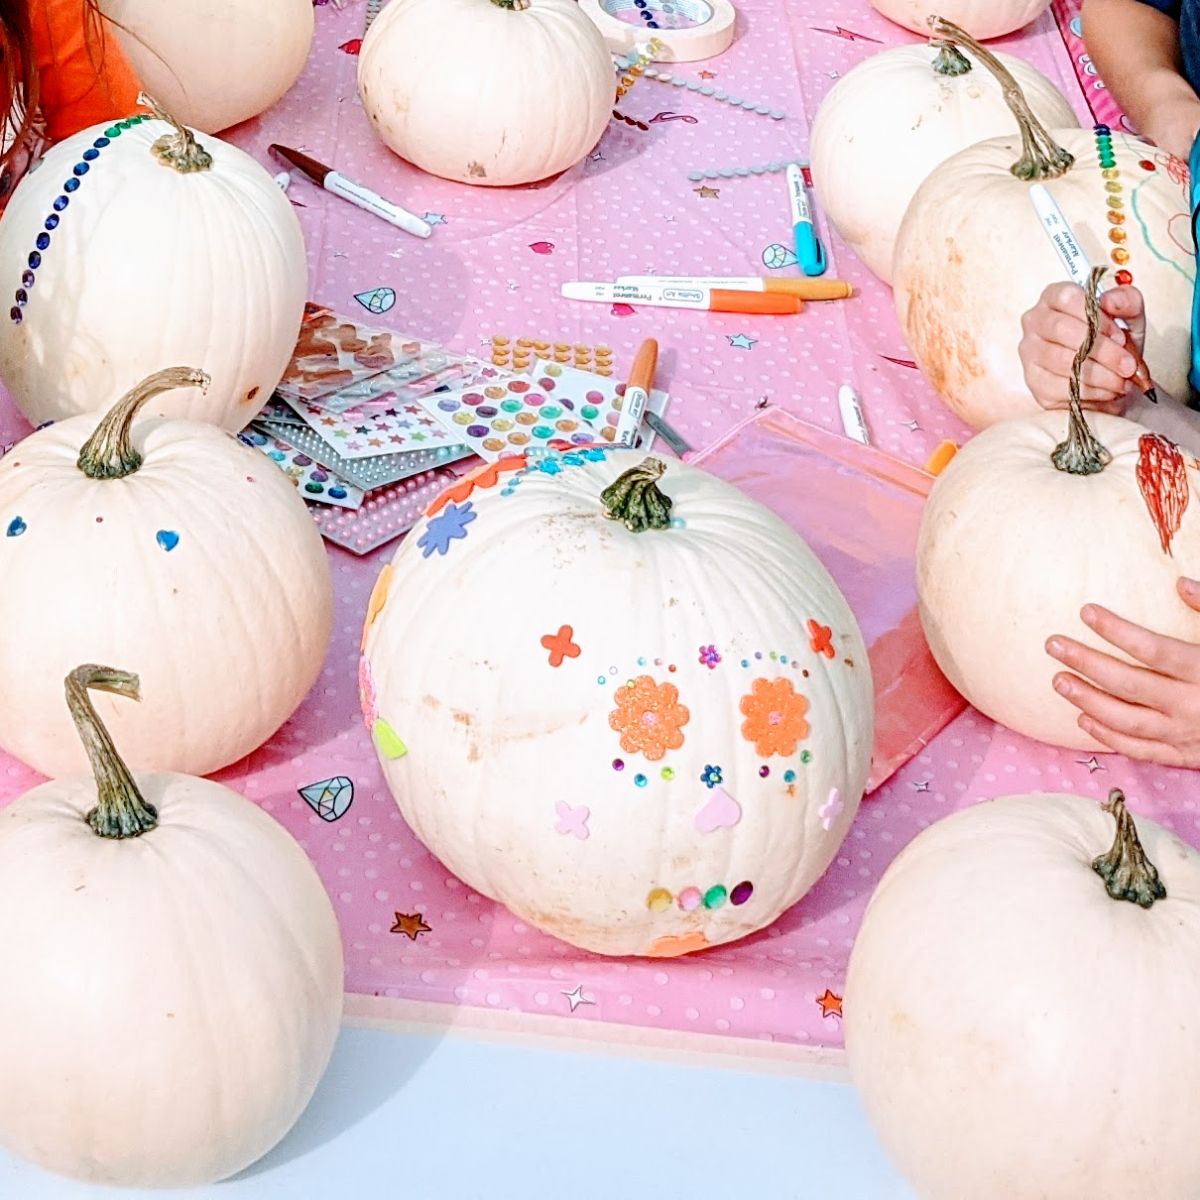 White pumpkins decorated like Mexican sugar skulls and arts and craft supplies